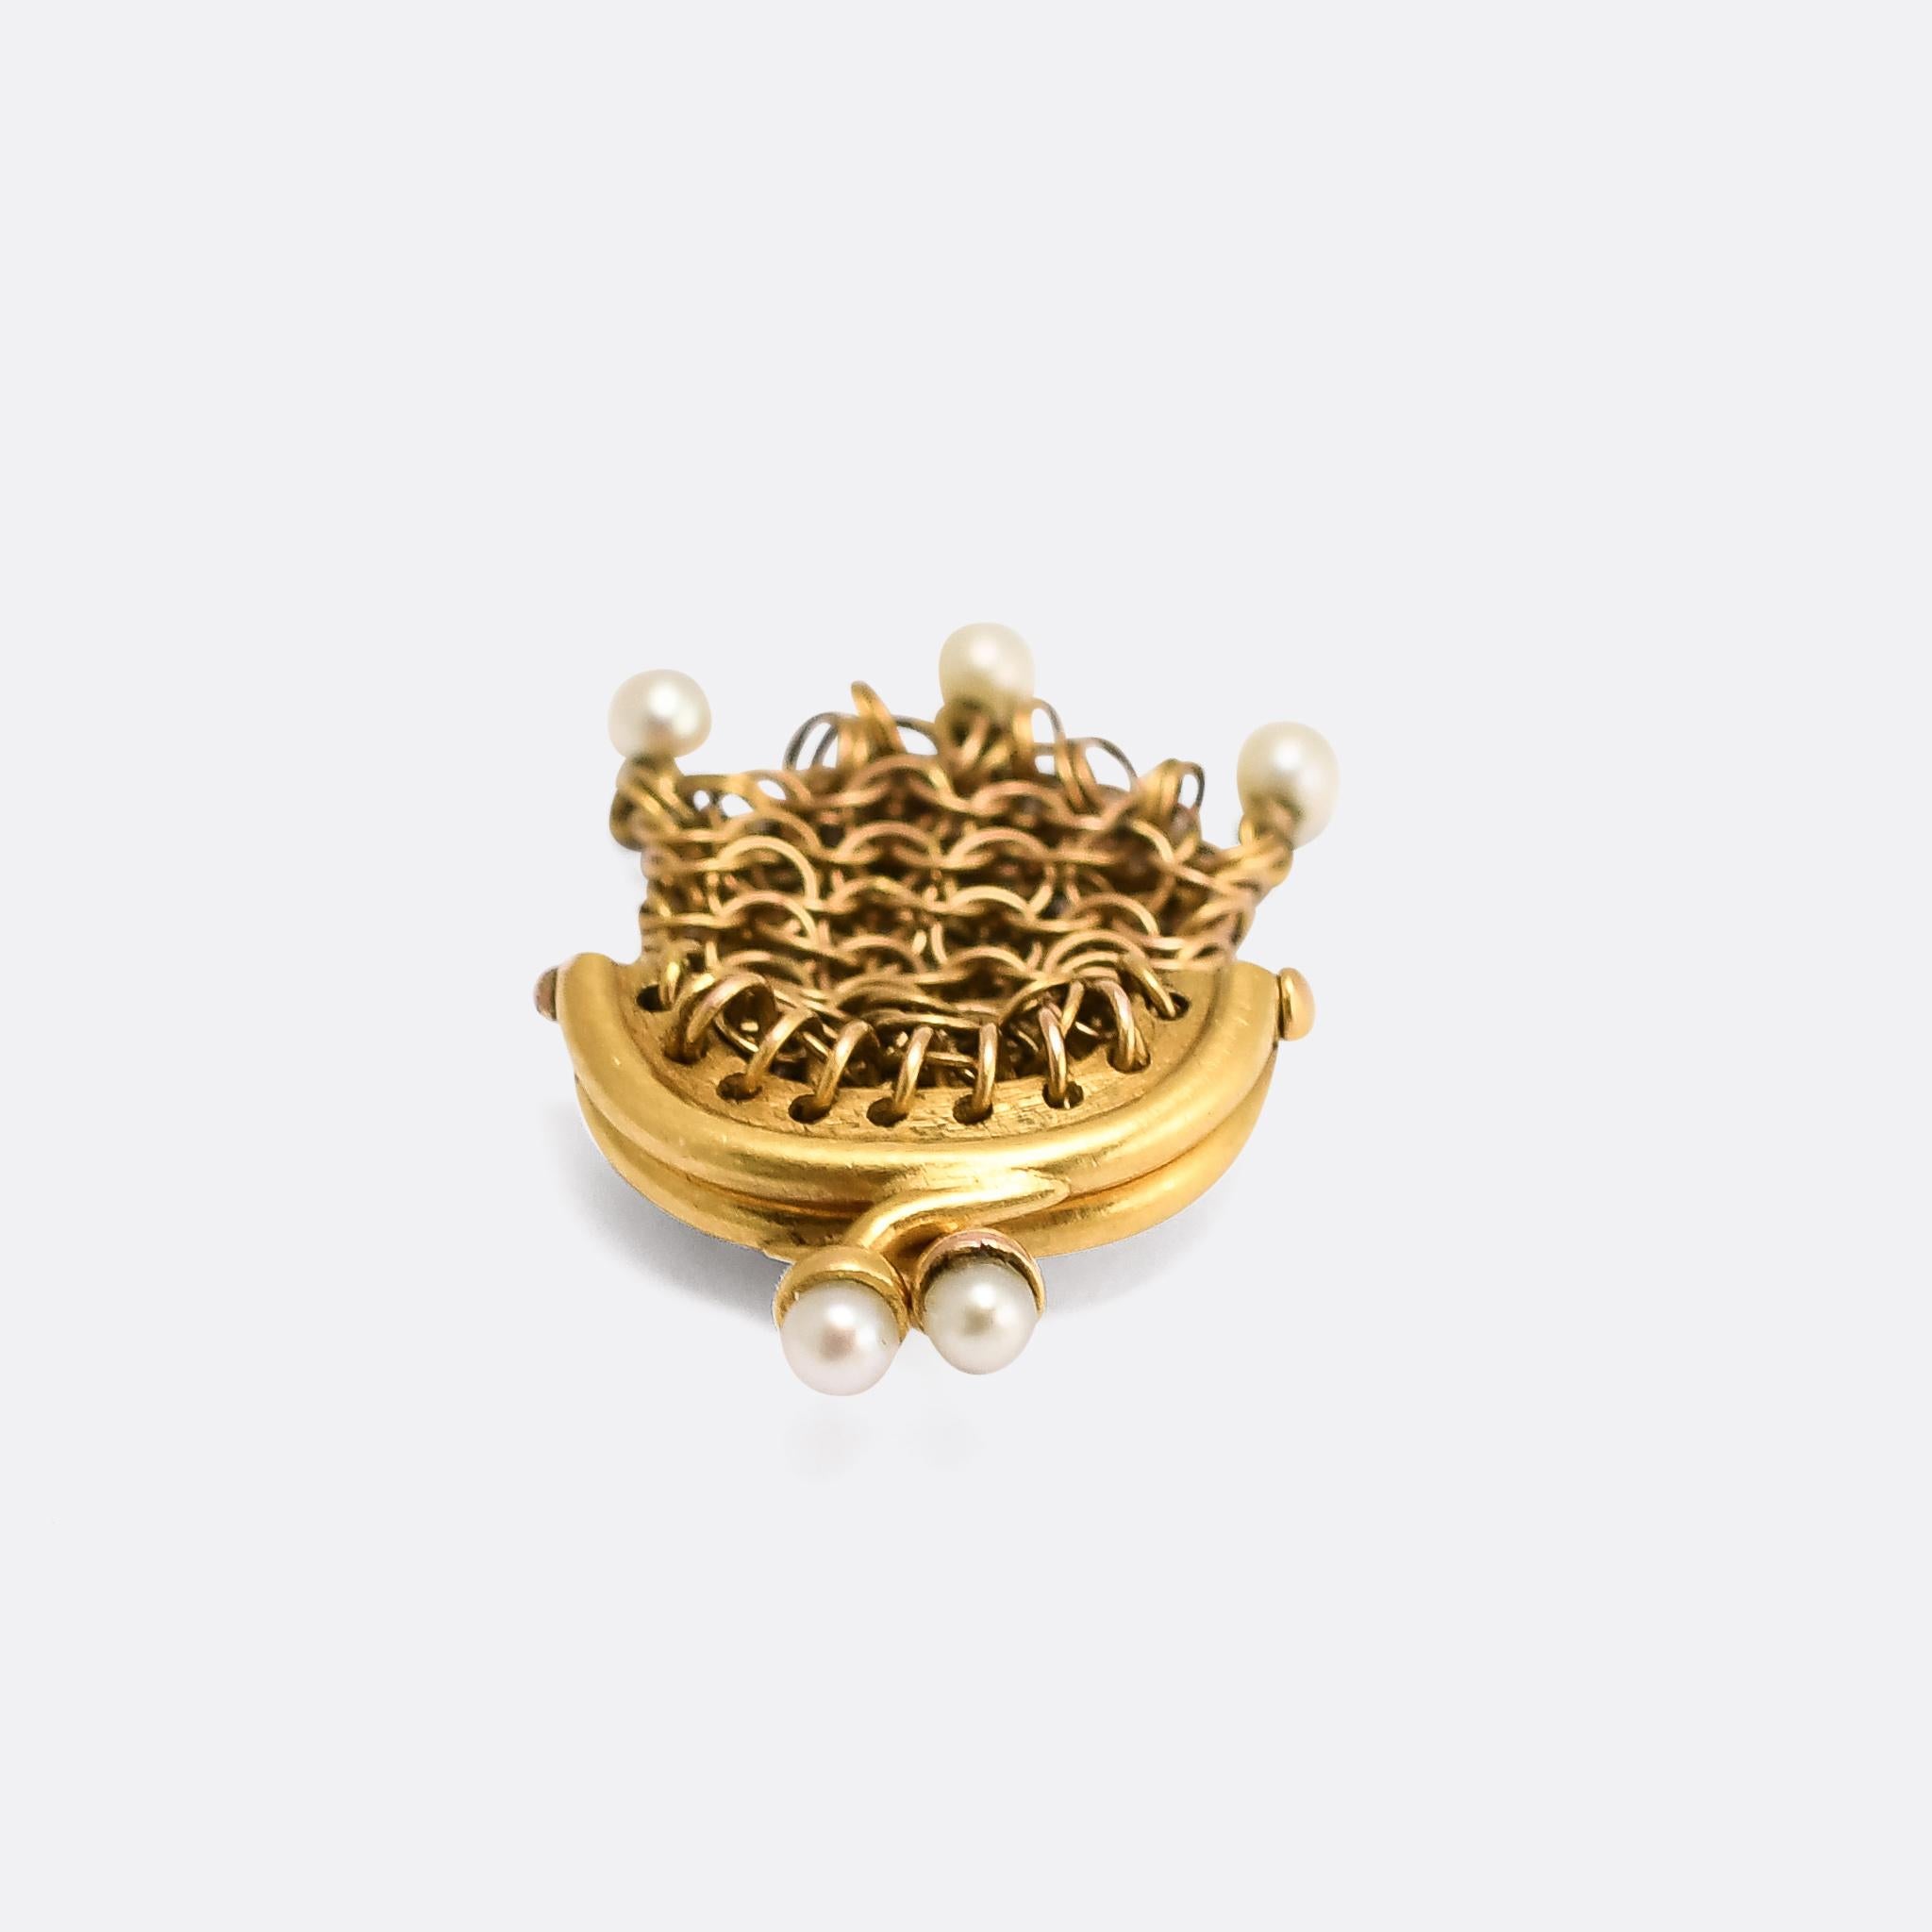 An unusual Georgian Miser's Purse charm in 18k gold. It comprises interlinked gold hoops to form the main body, with a hinged top section that opens to grant access. While there's not enough room inside for actual coins, it's a perfect size to hold